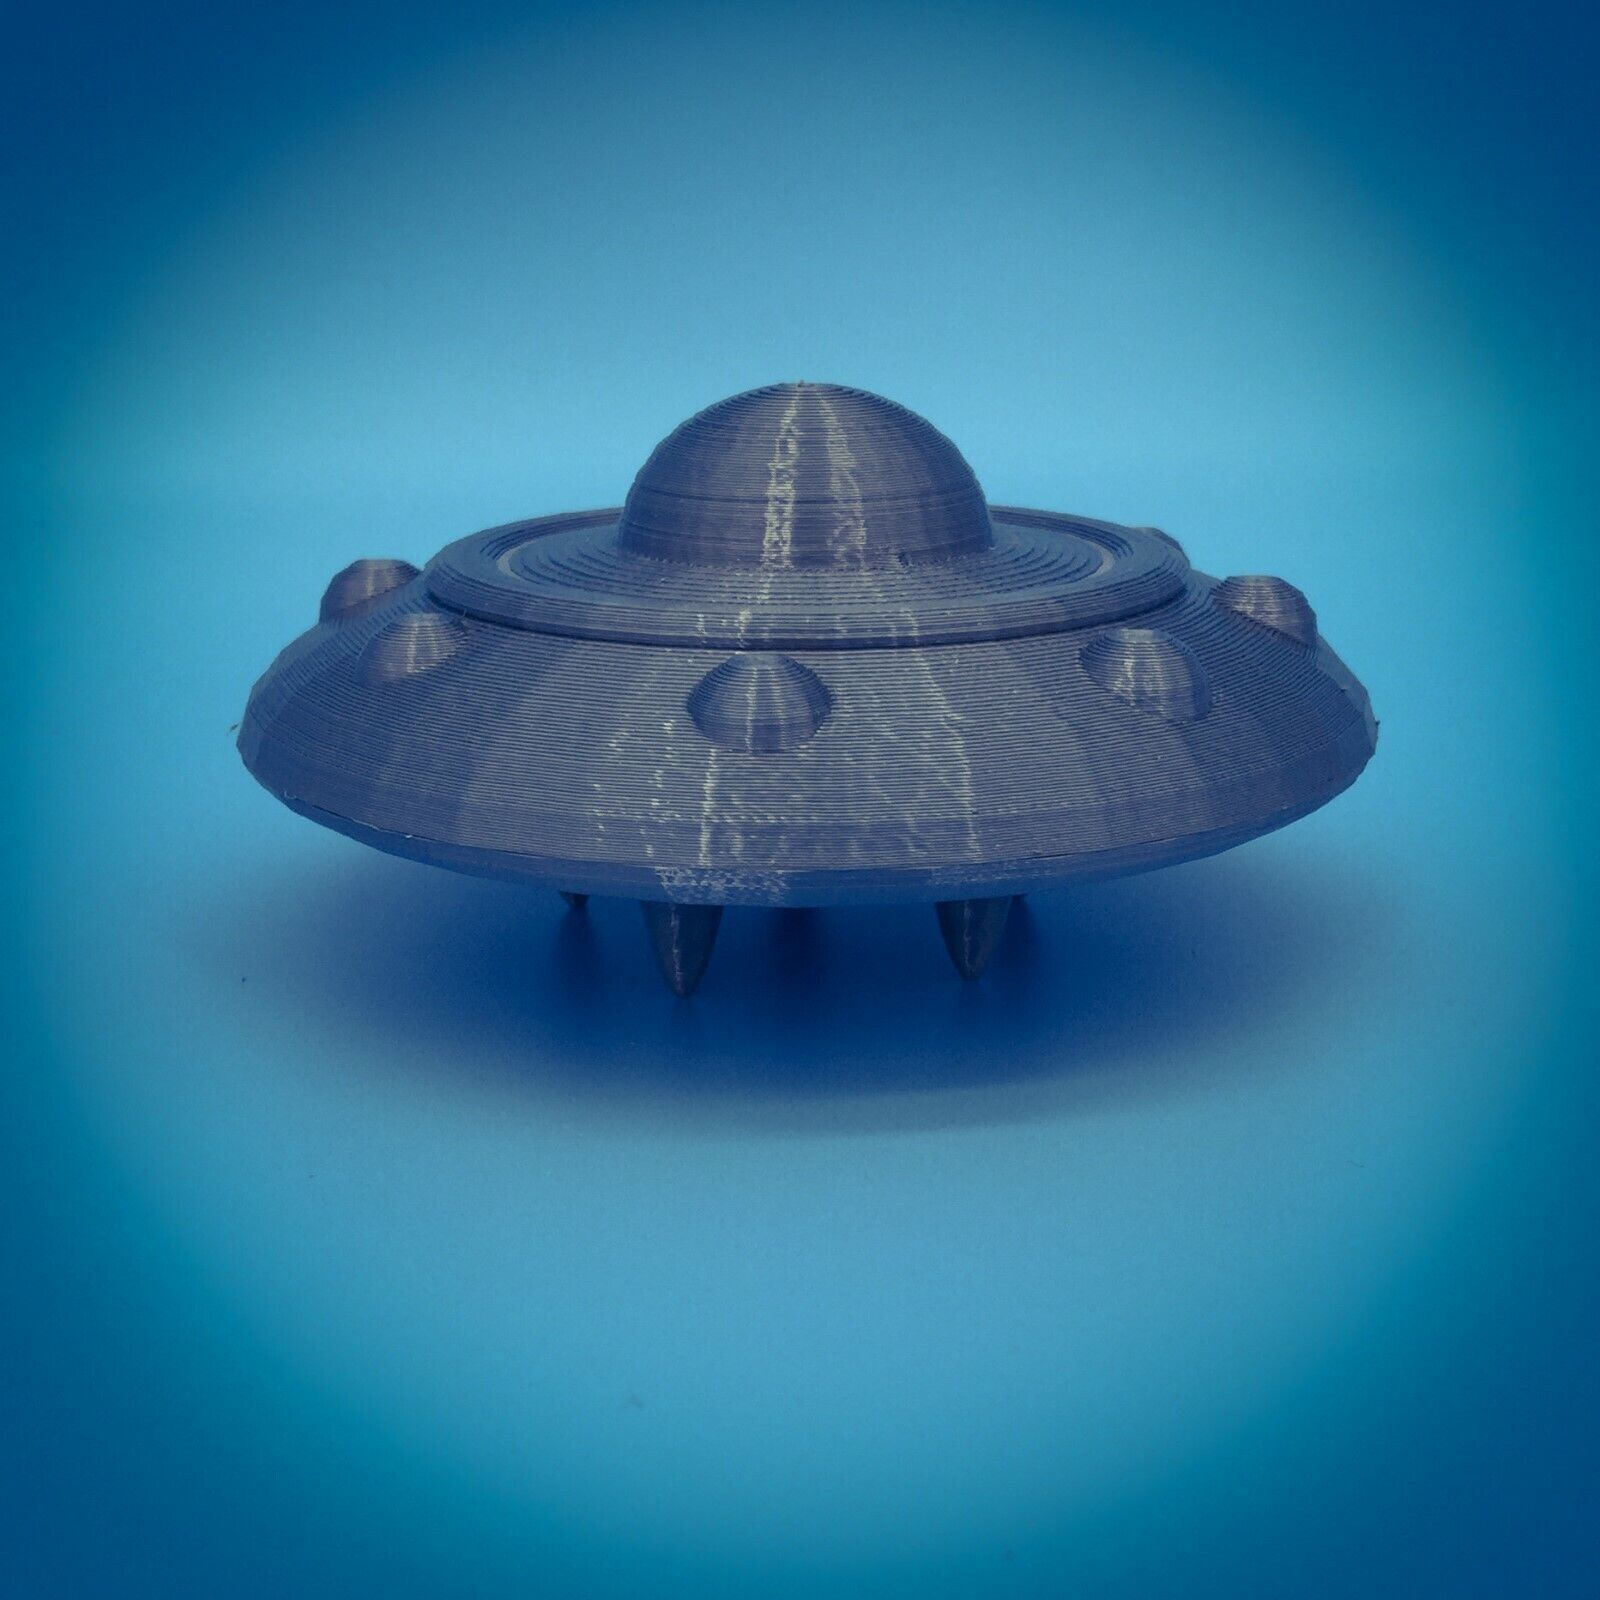 UFO Flying Saucer Alien Space Ship - Z Scale 1:220 - Retro or Classic Style  USA!